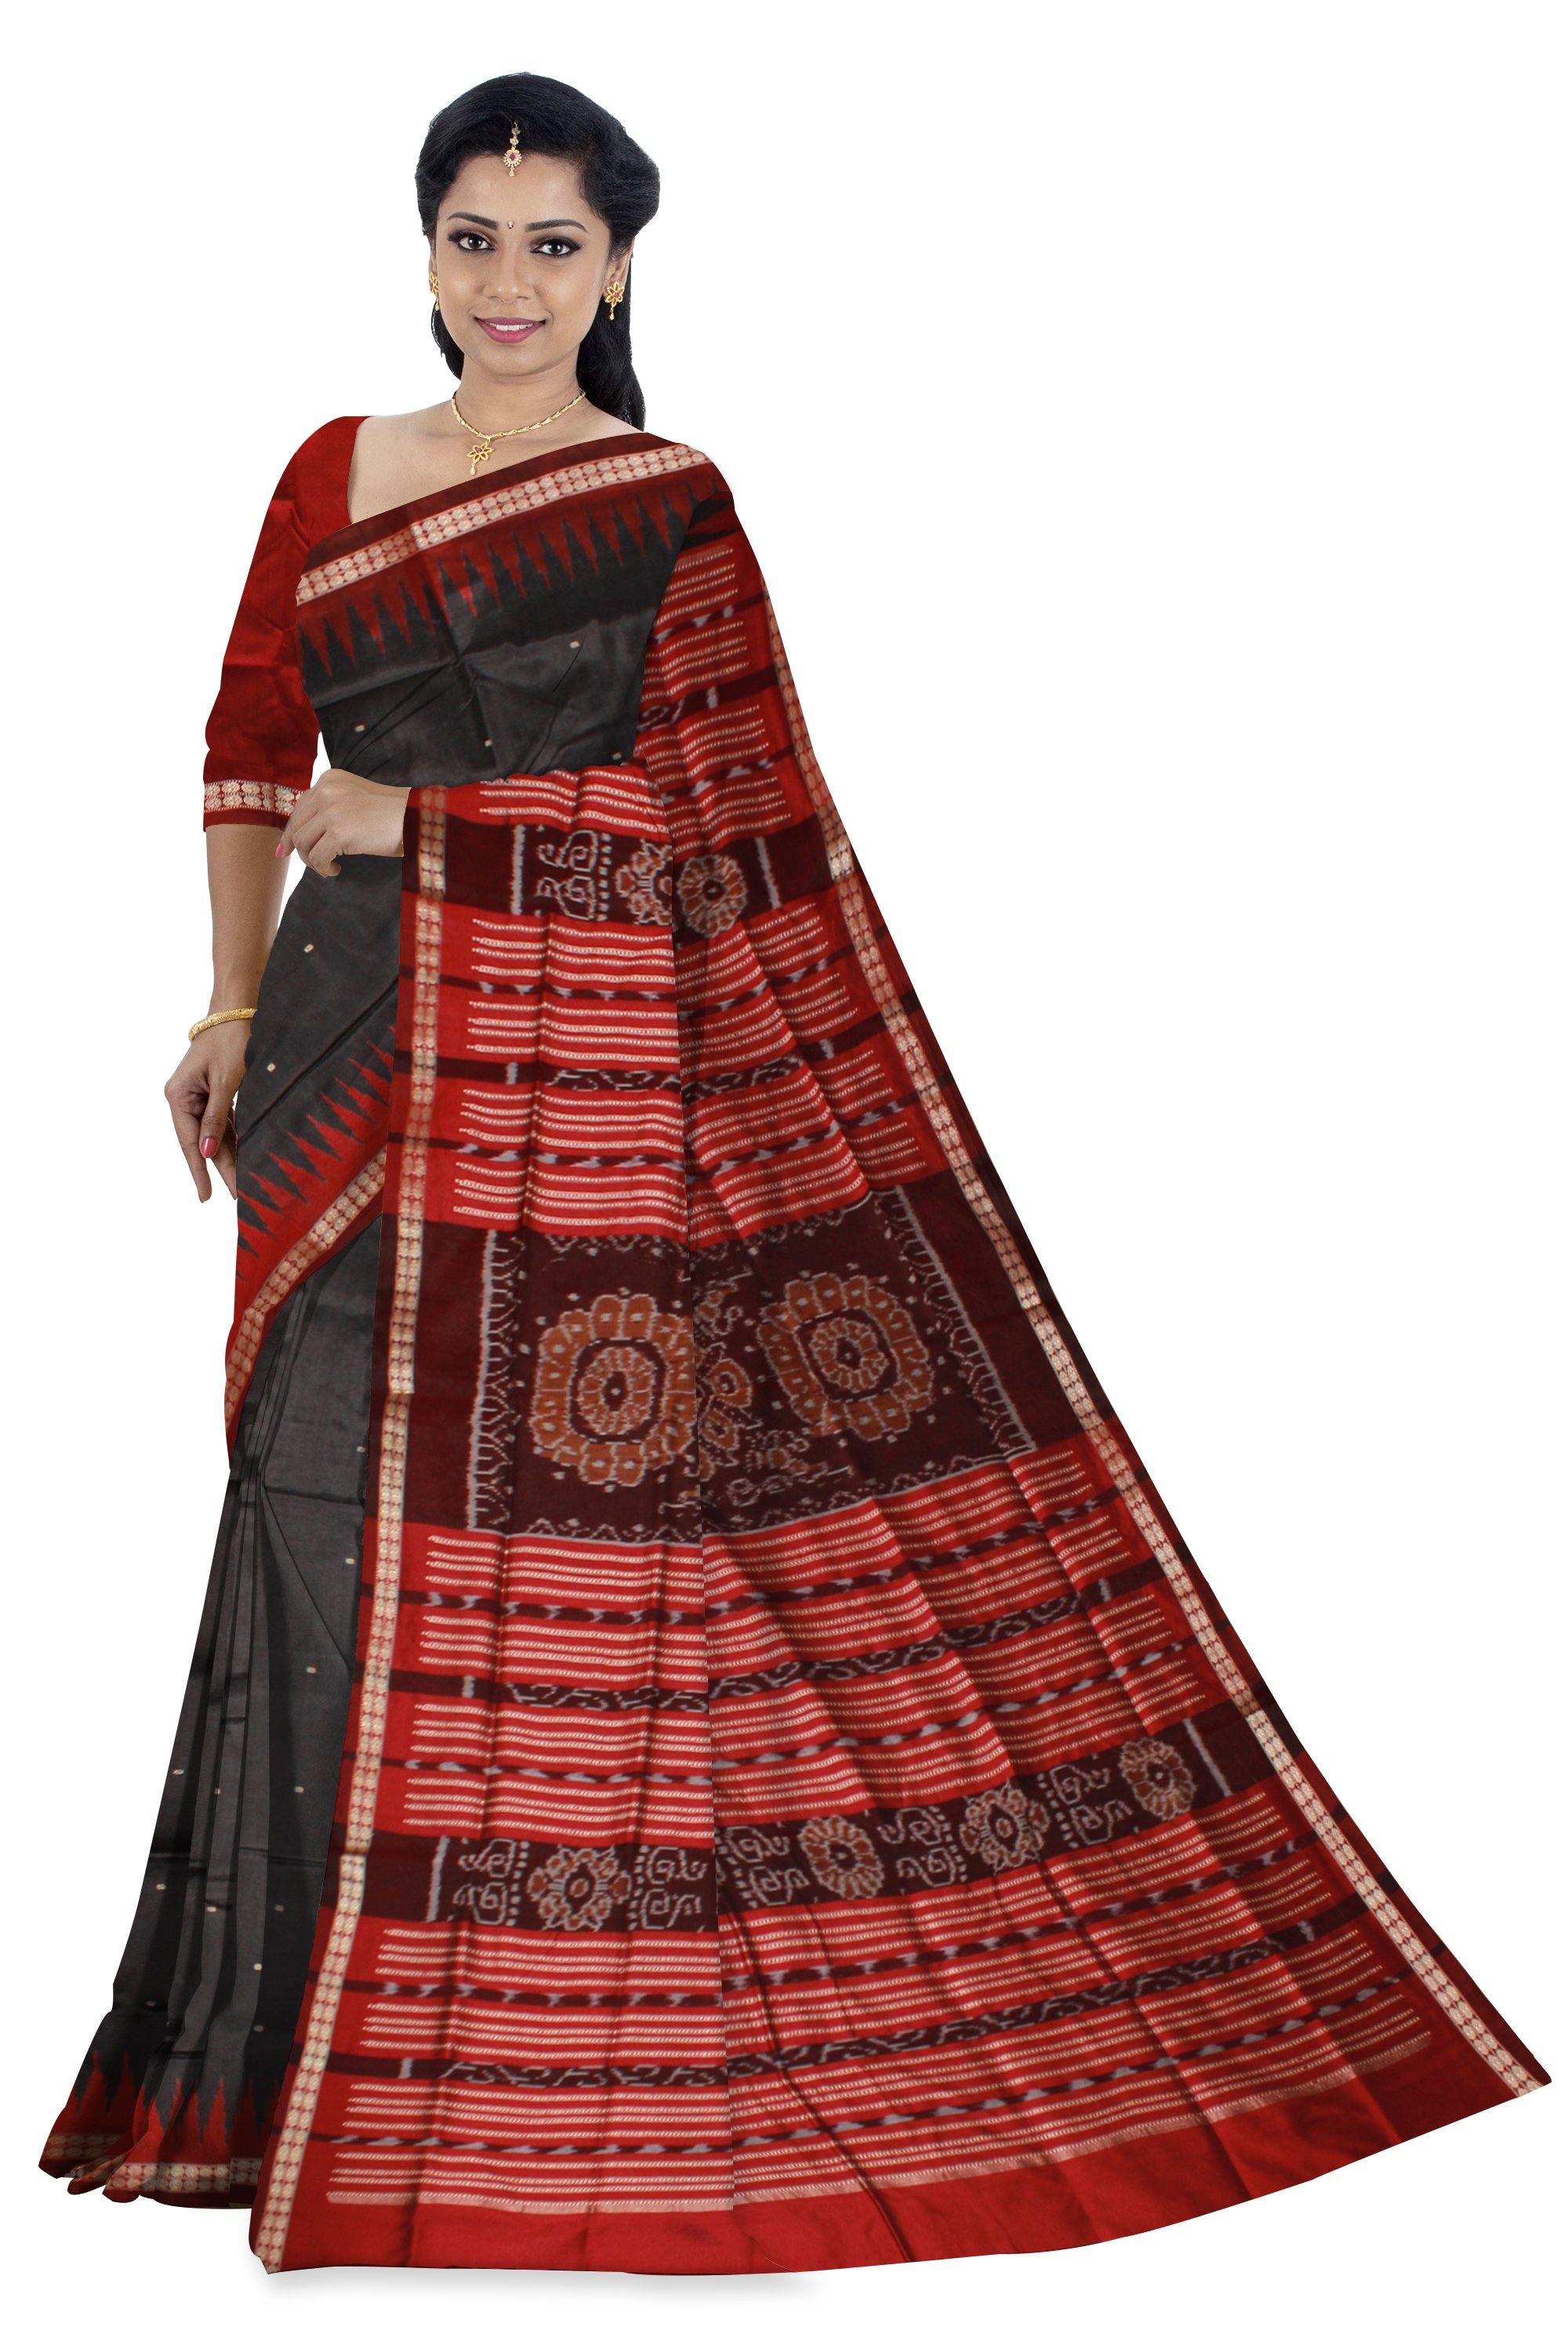 Black color buti pattern pata saree with red border available with  blouse piece - Koshali Arts & Crafts Enterprise